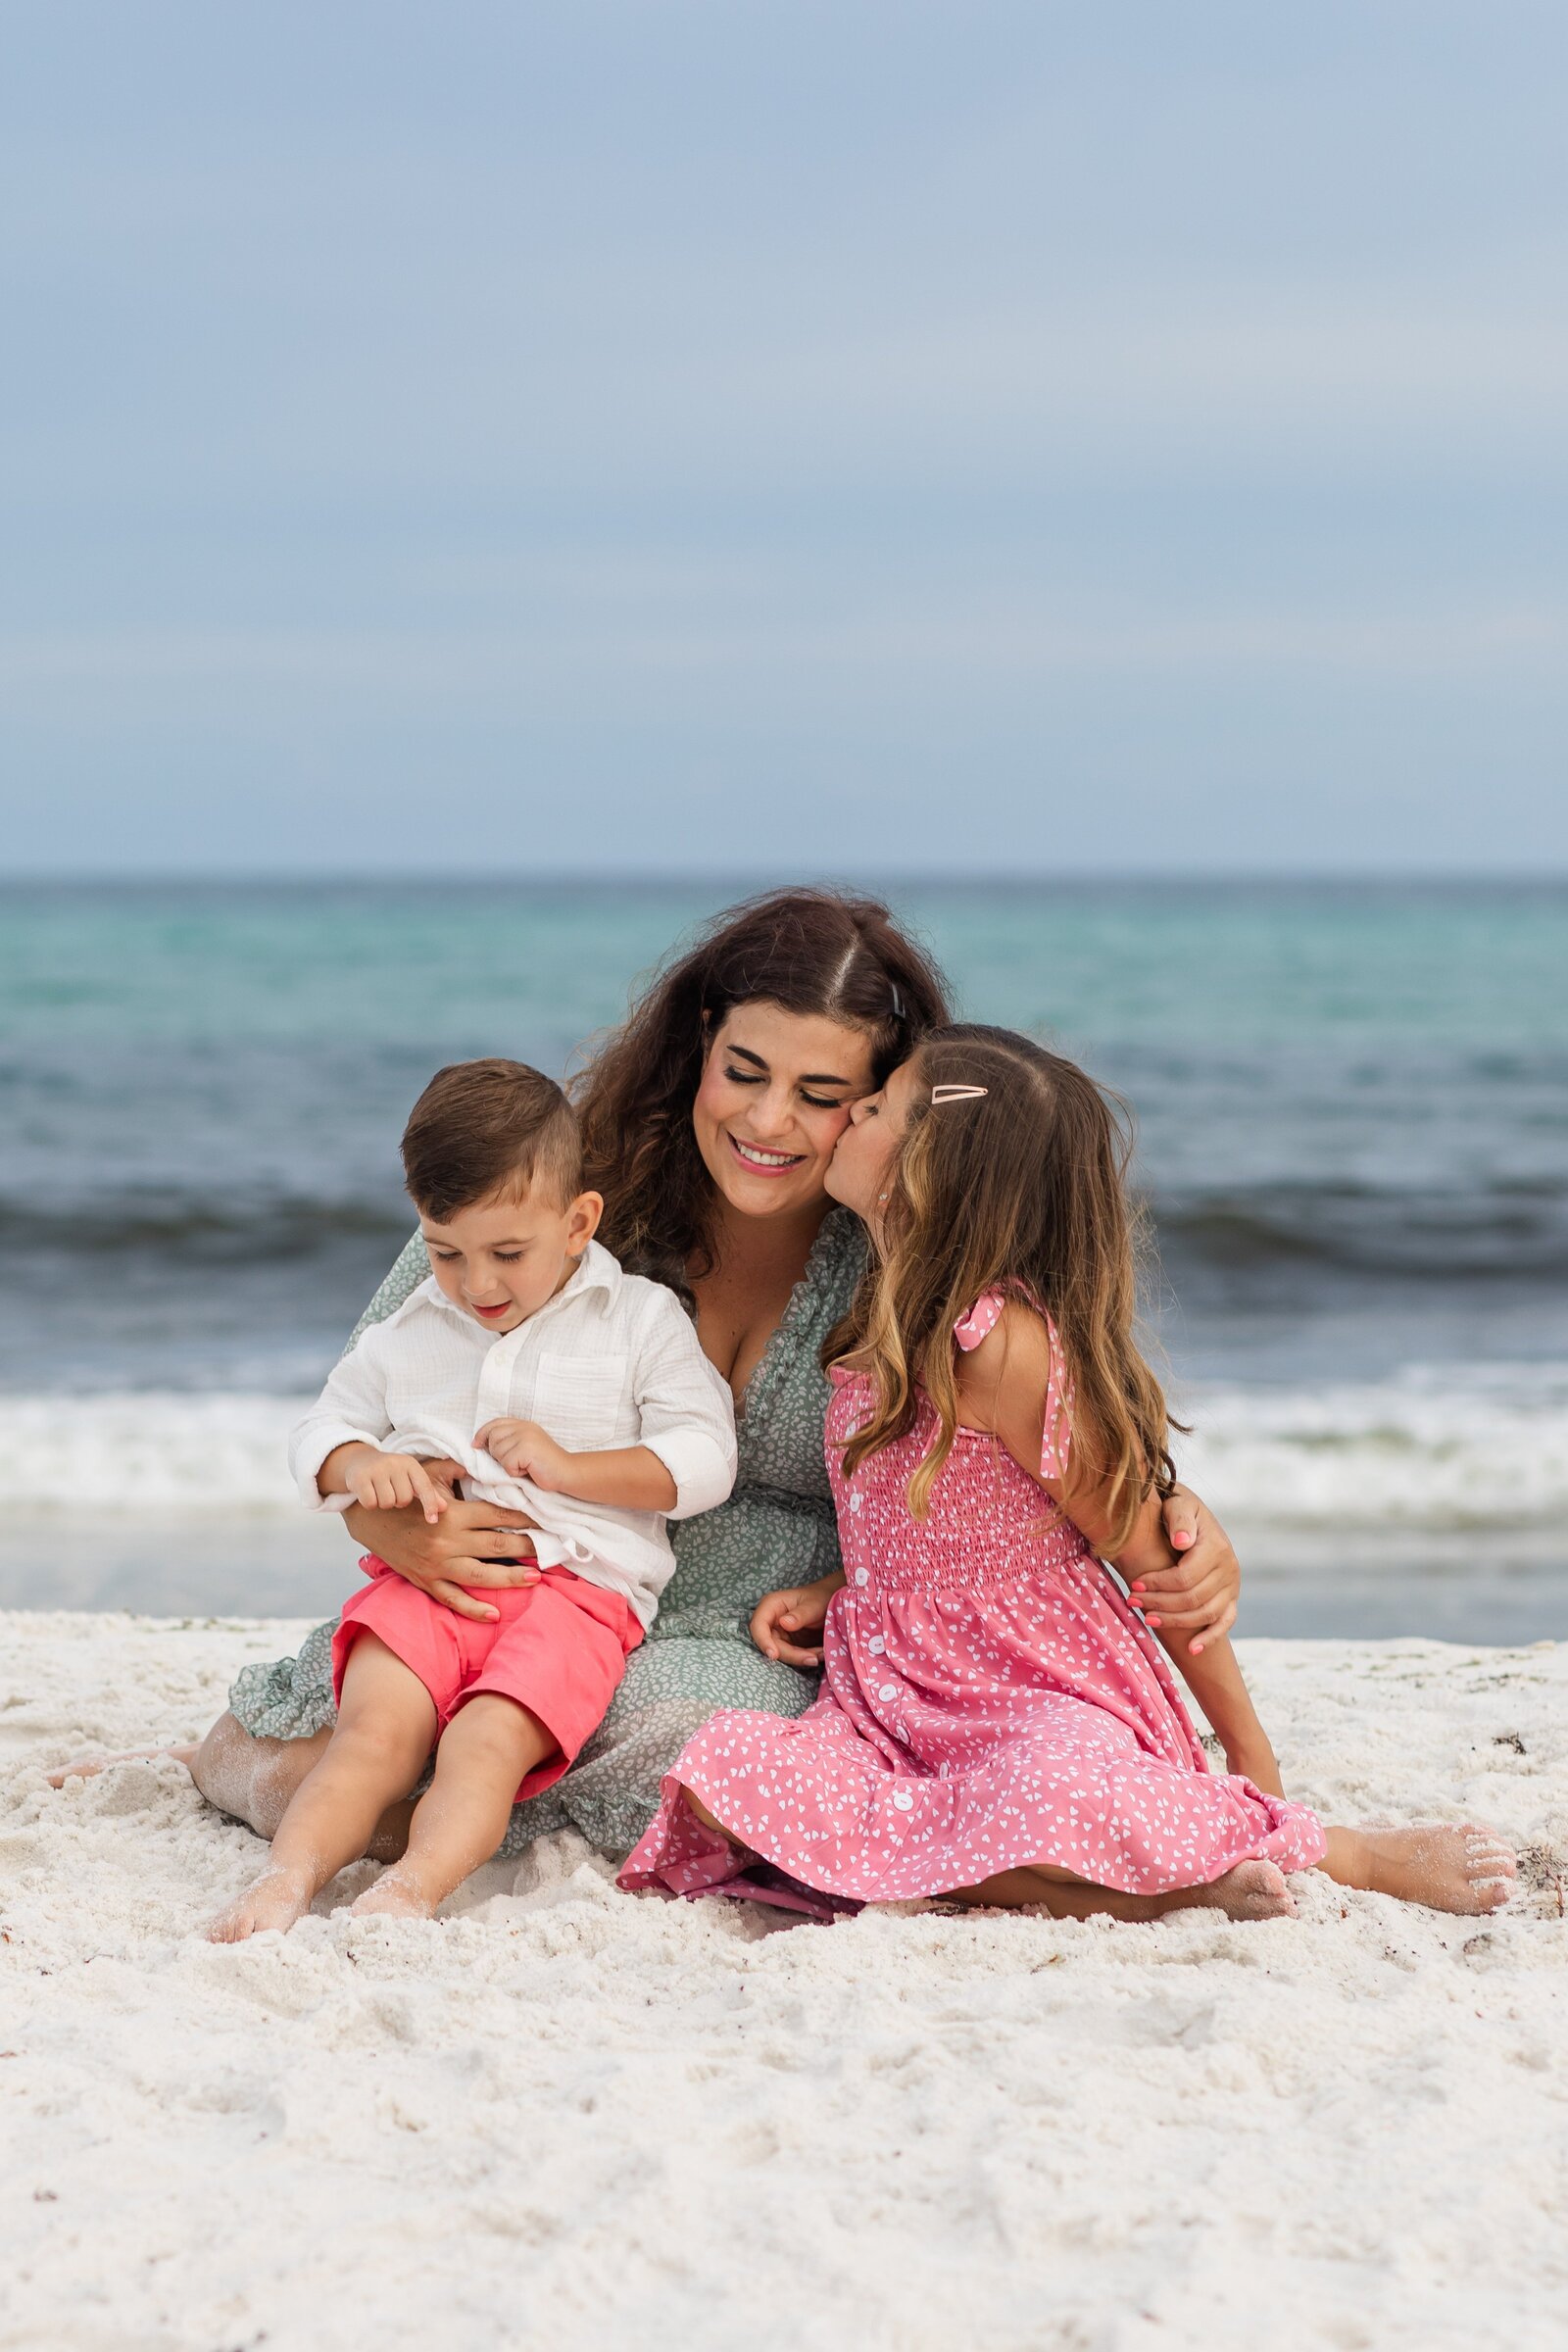 Pensacola Beach family vacation photo session. Kids sitting with mom in the sand.